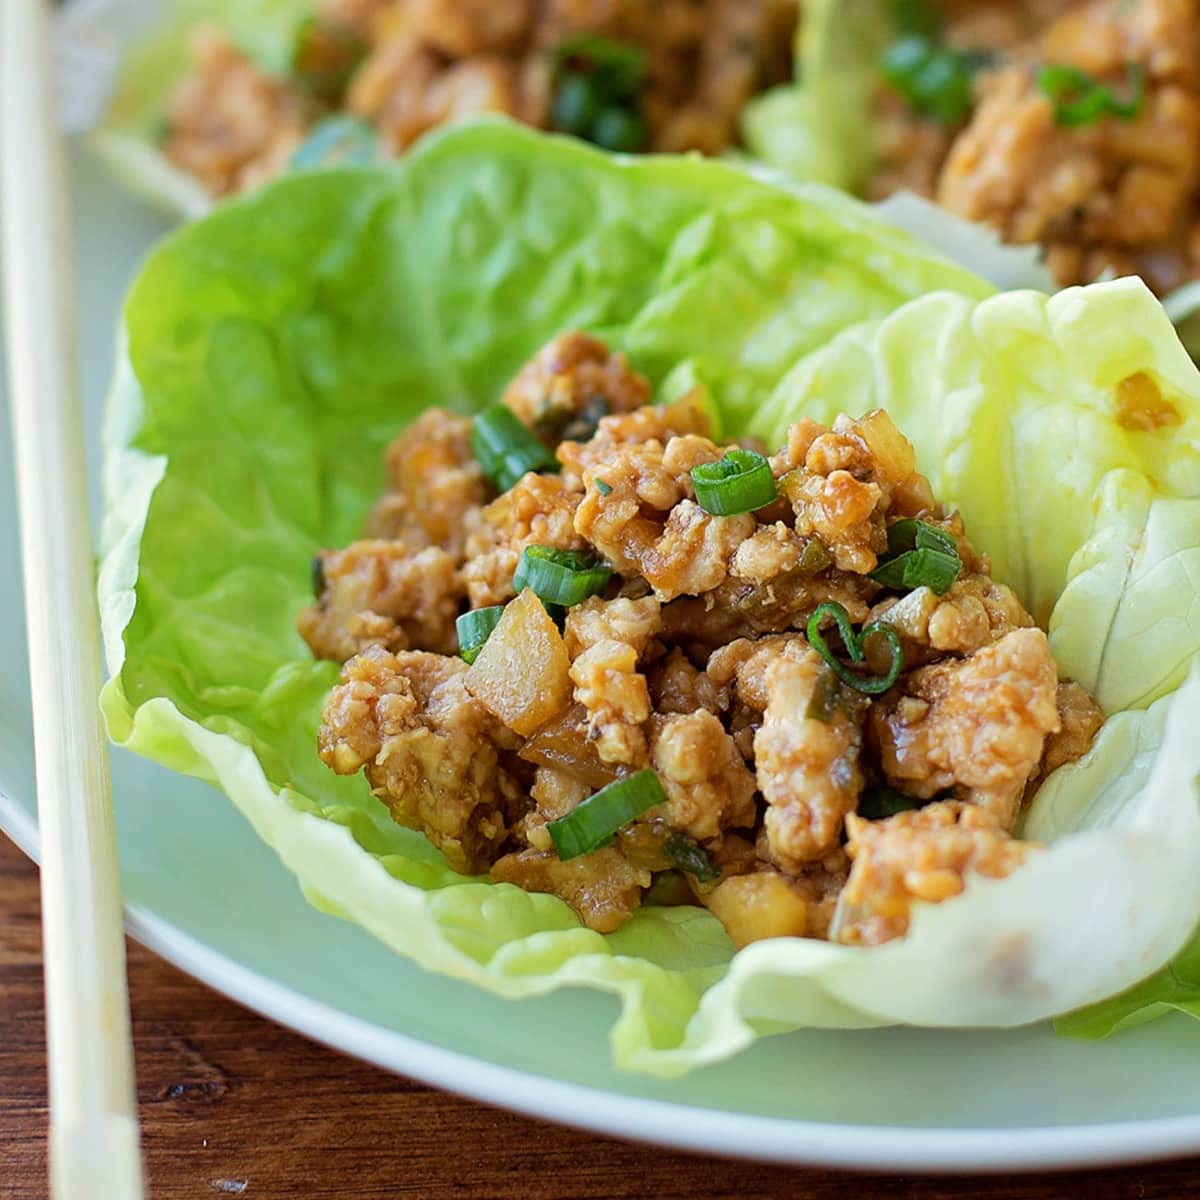 Quick dinner ideas - chicken lettuce wrap served on a plate.